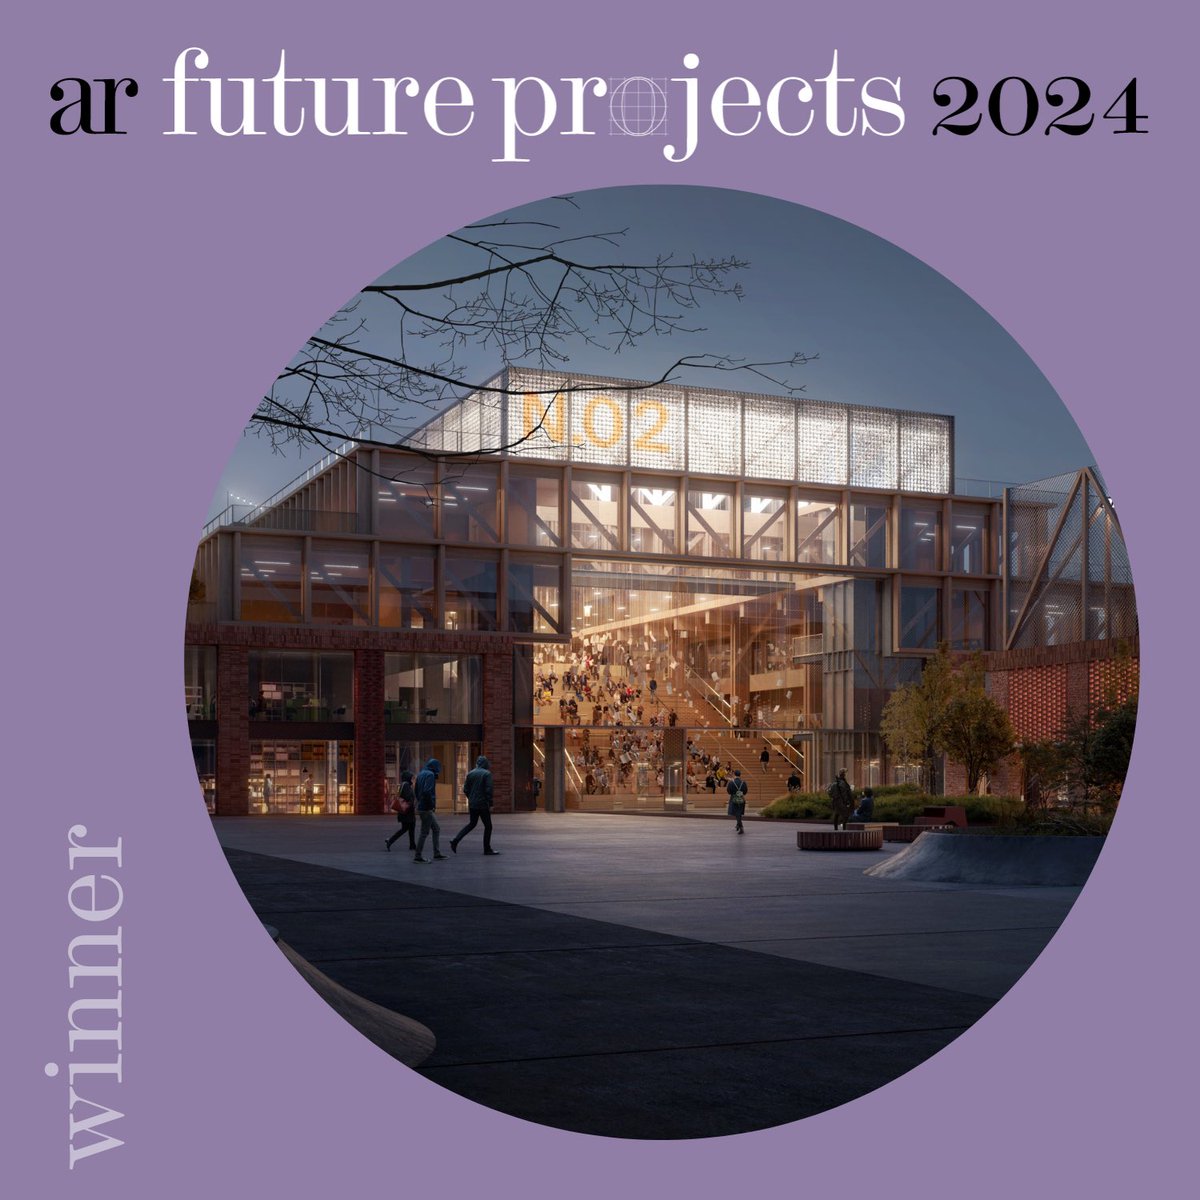 We're delighted to have won the @ArchReview Future Projects 2024 Awards with Pir2 Arkitekter for our Tårnkvartalet project, for both the Education category and Overall Winner. We are looking forward to presenting the winning scheme at @FootprintPlus next week…